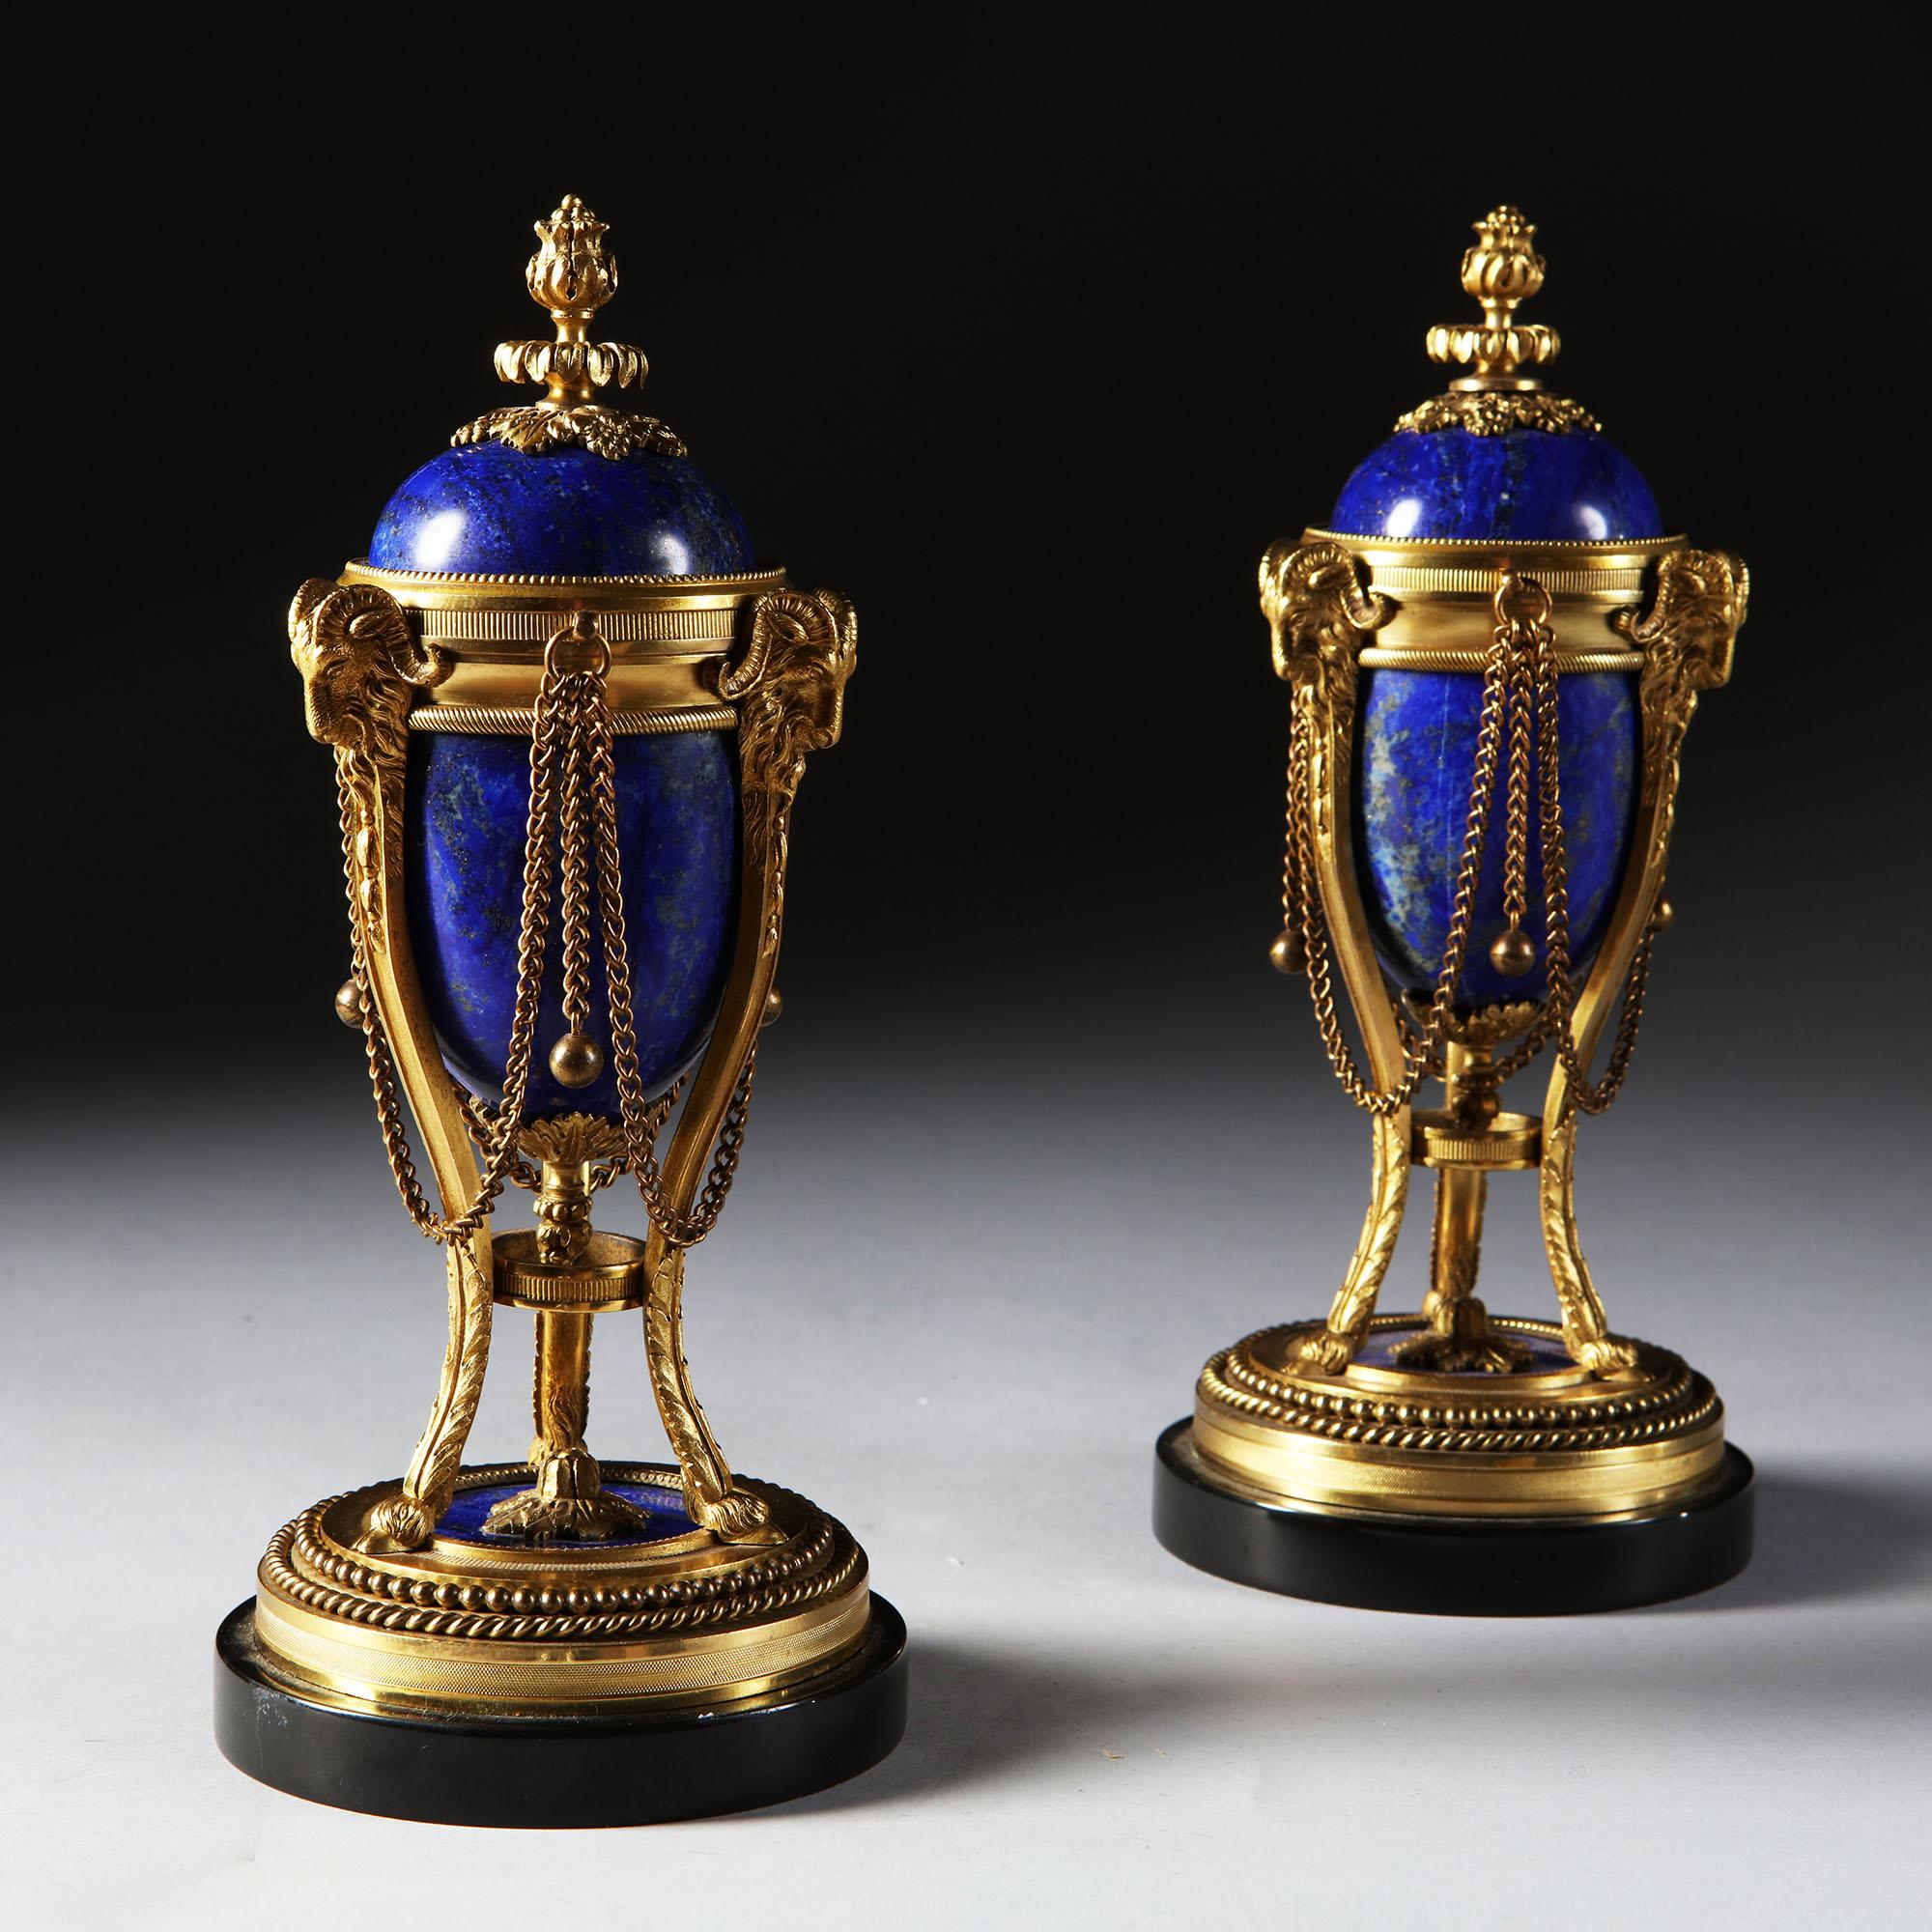 So rare to find such a beautiful pair of lapis lazuli mounted ormolu cassolettes. The lapis on these is almost pure blue, perfect contrast against the gold of the ormolu. 

These are 19th century from the Napoleon III period, they are based on a